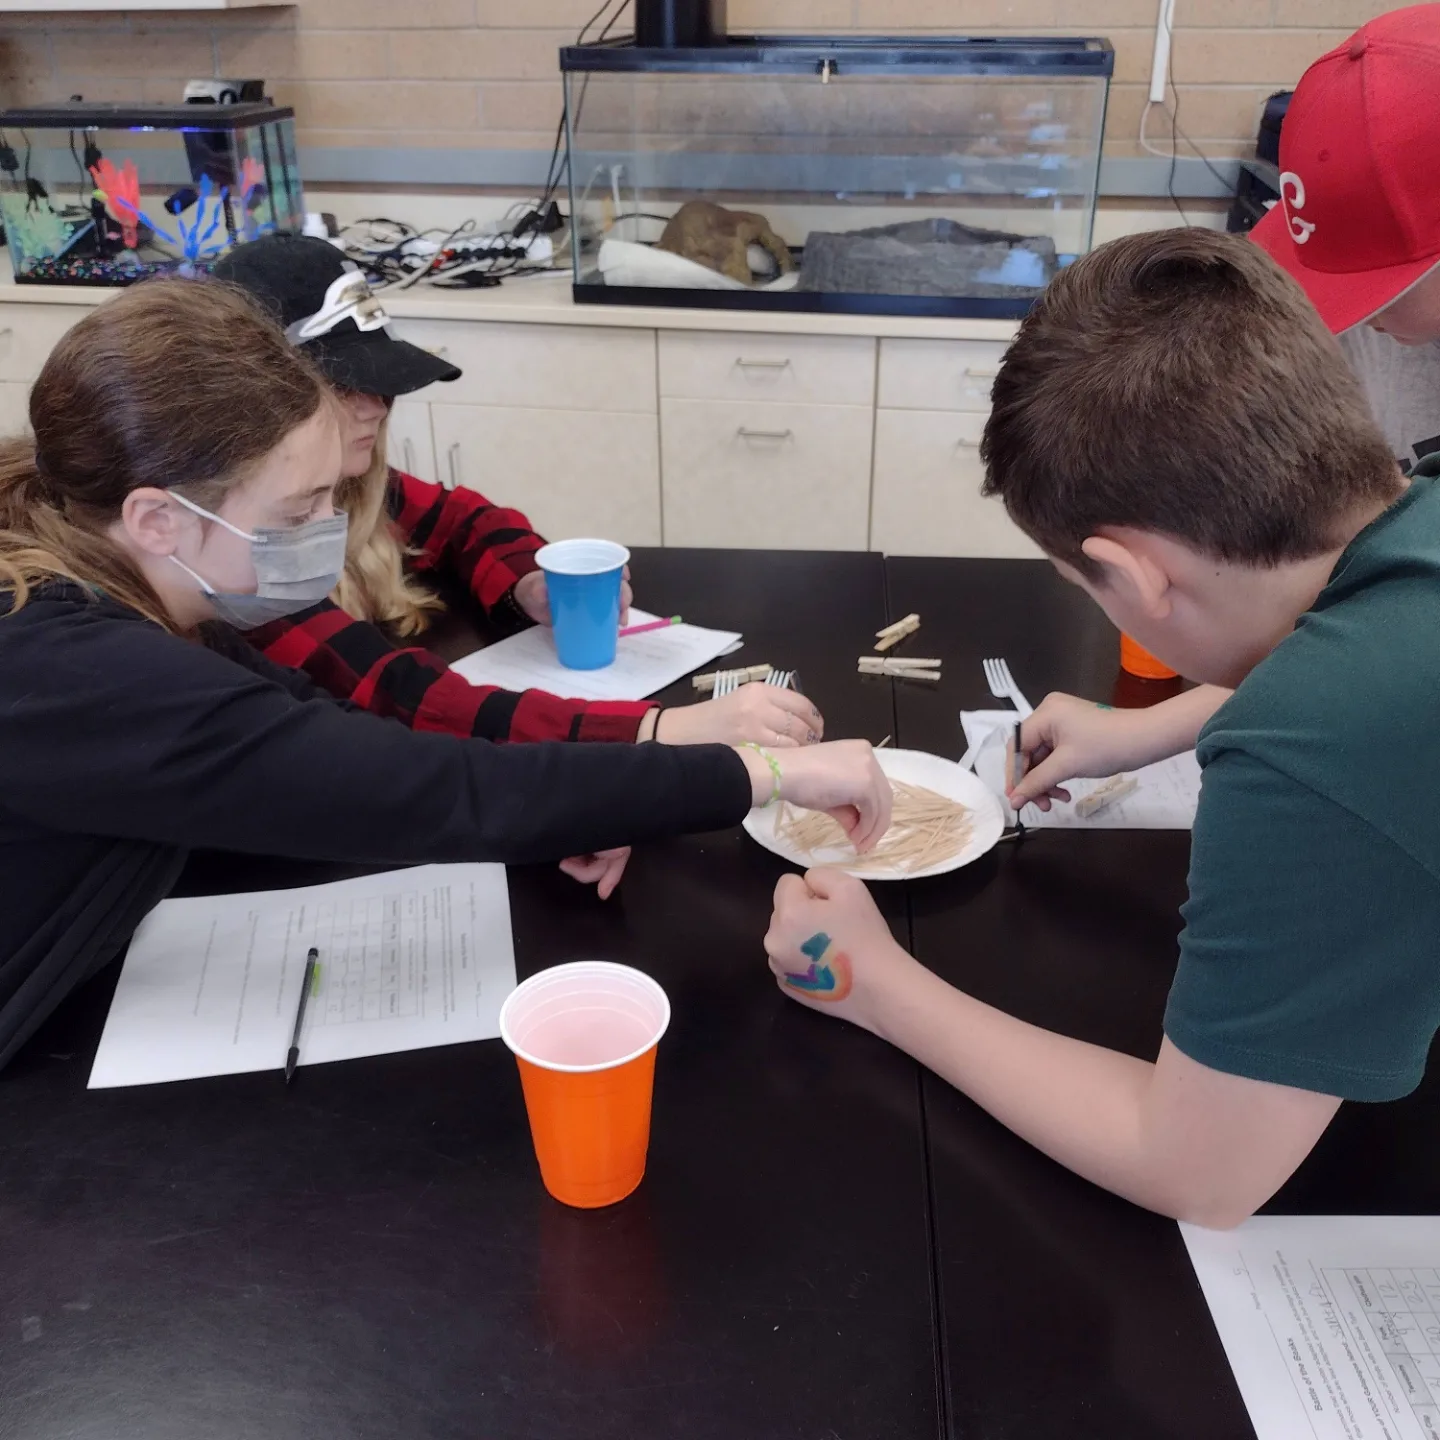 Students engaged in their science class